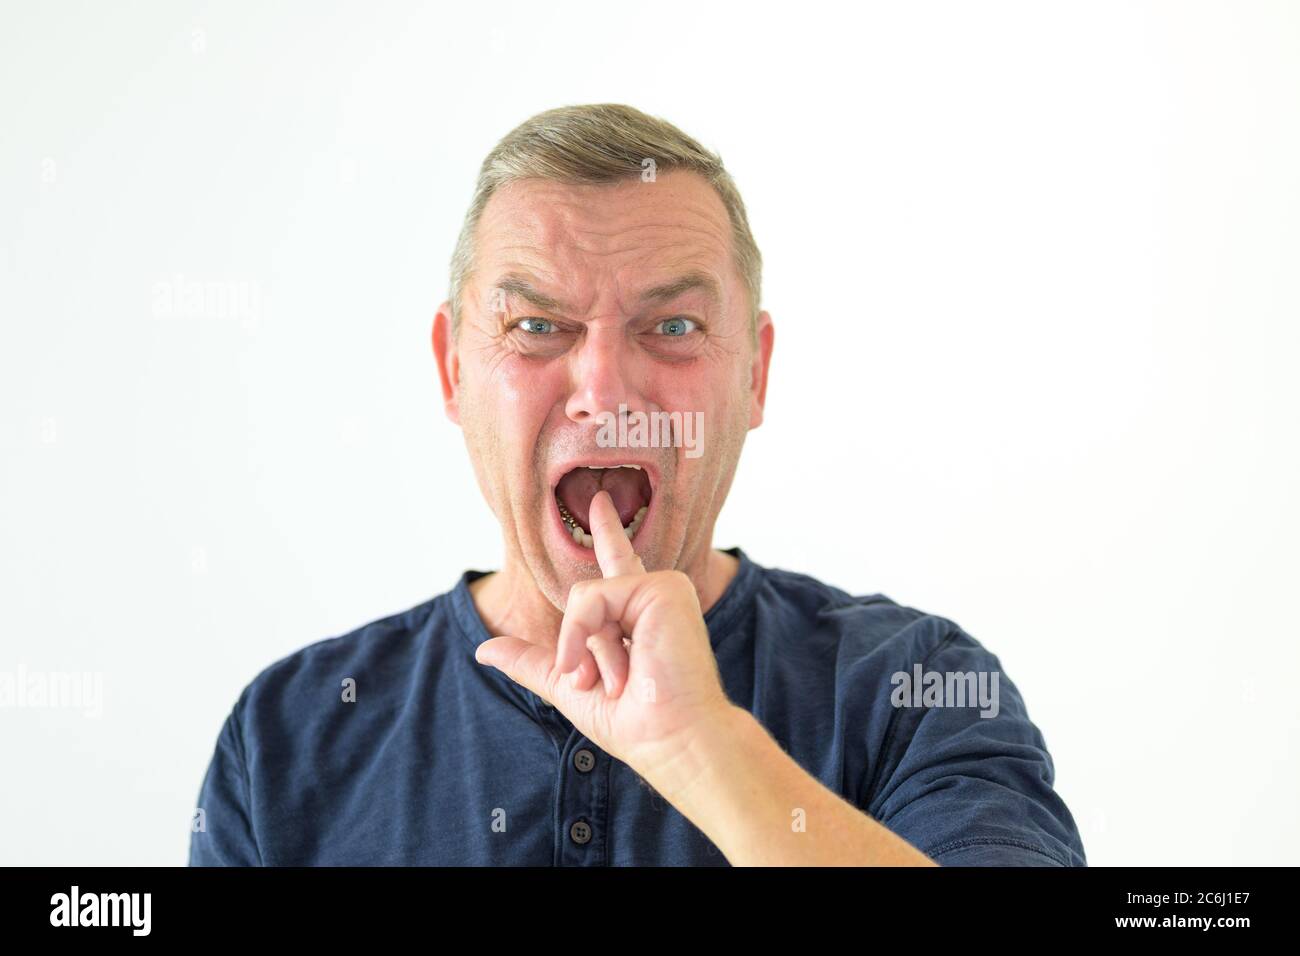 https://c8.alamy.com/comp/2C6J1E7/suicidal-man-making-a-gun-gesture-with-his-hand-pointing-into-his-open-mouth-as-he-stares-in-anguish-at-the-camera-over-white-2C6J1E7.jpg